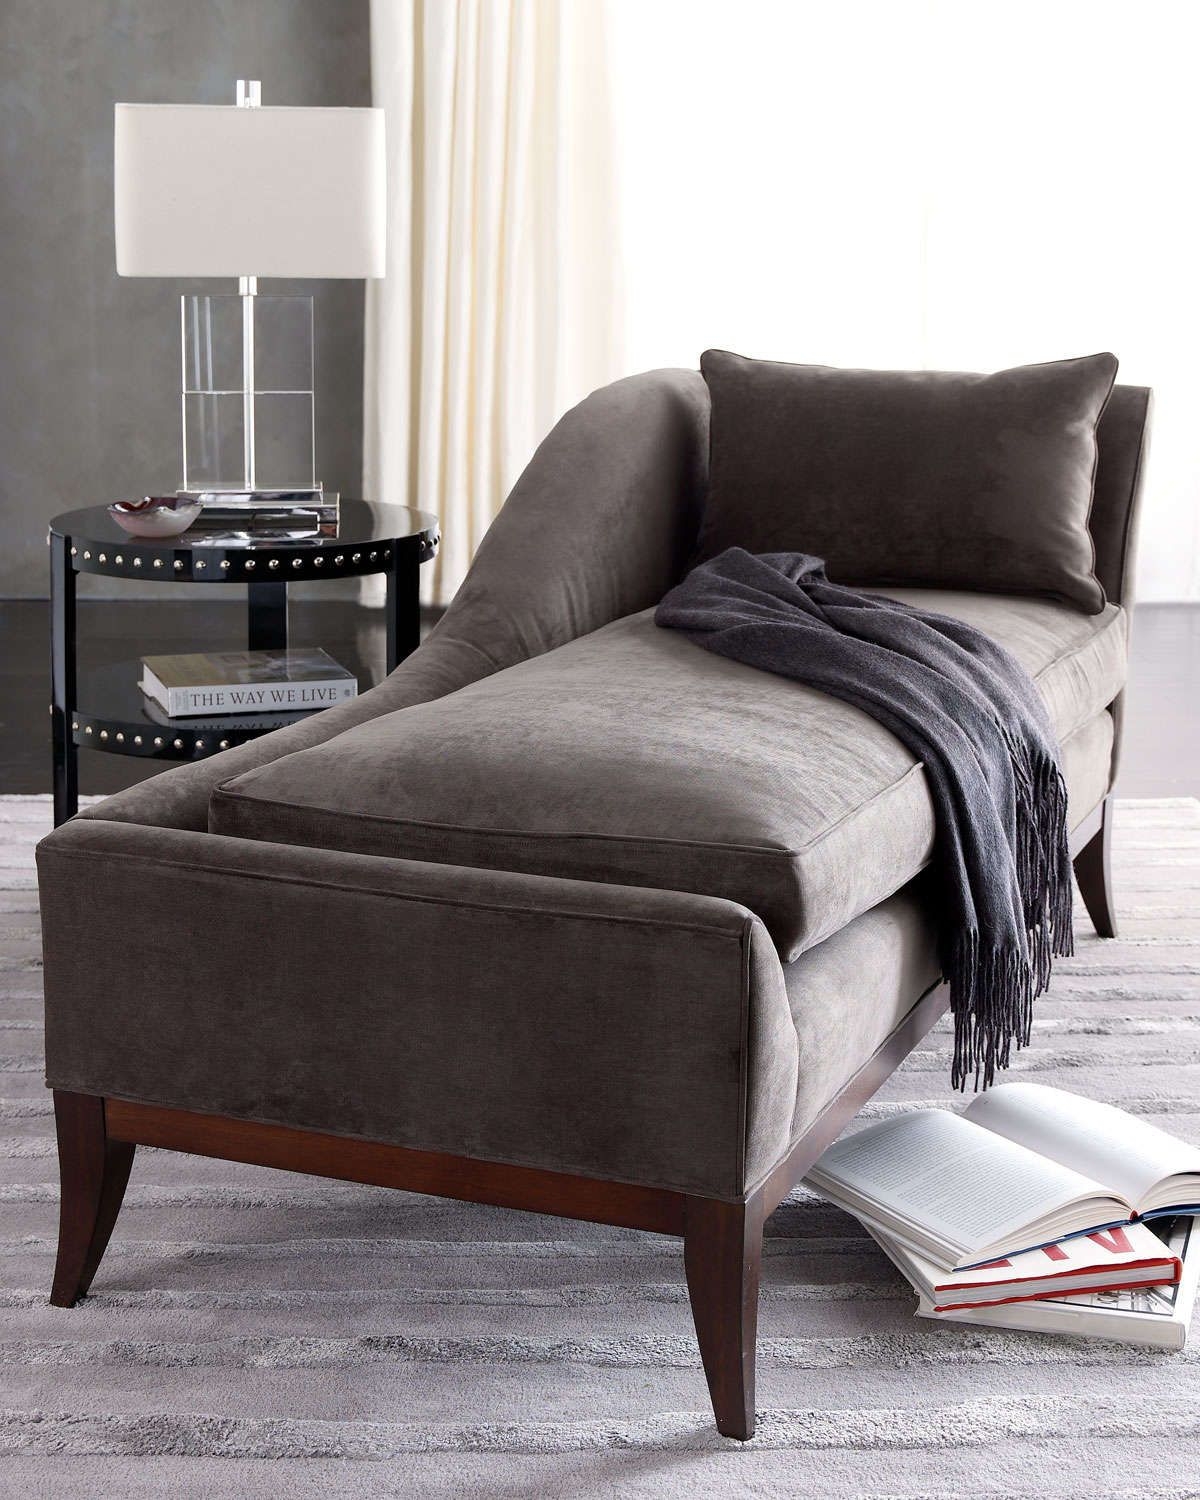 Small leather chaise lounge